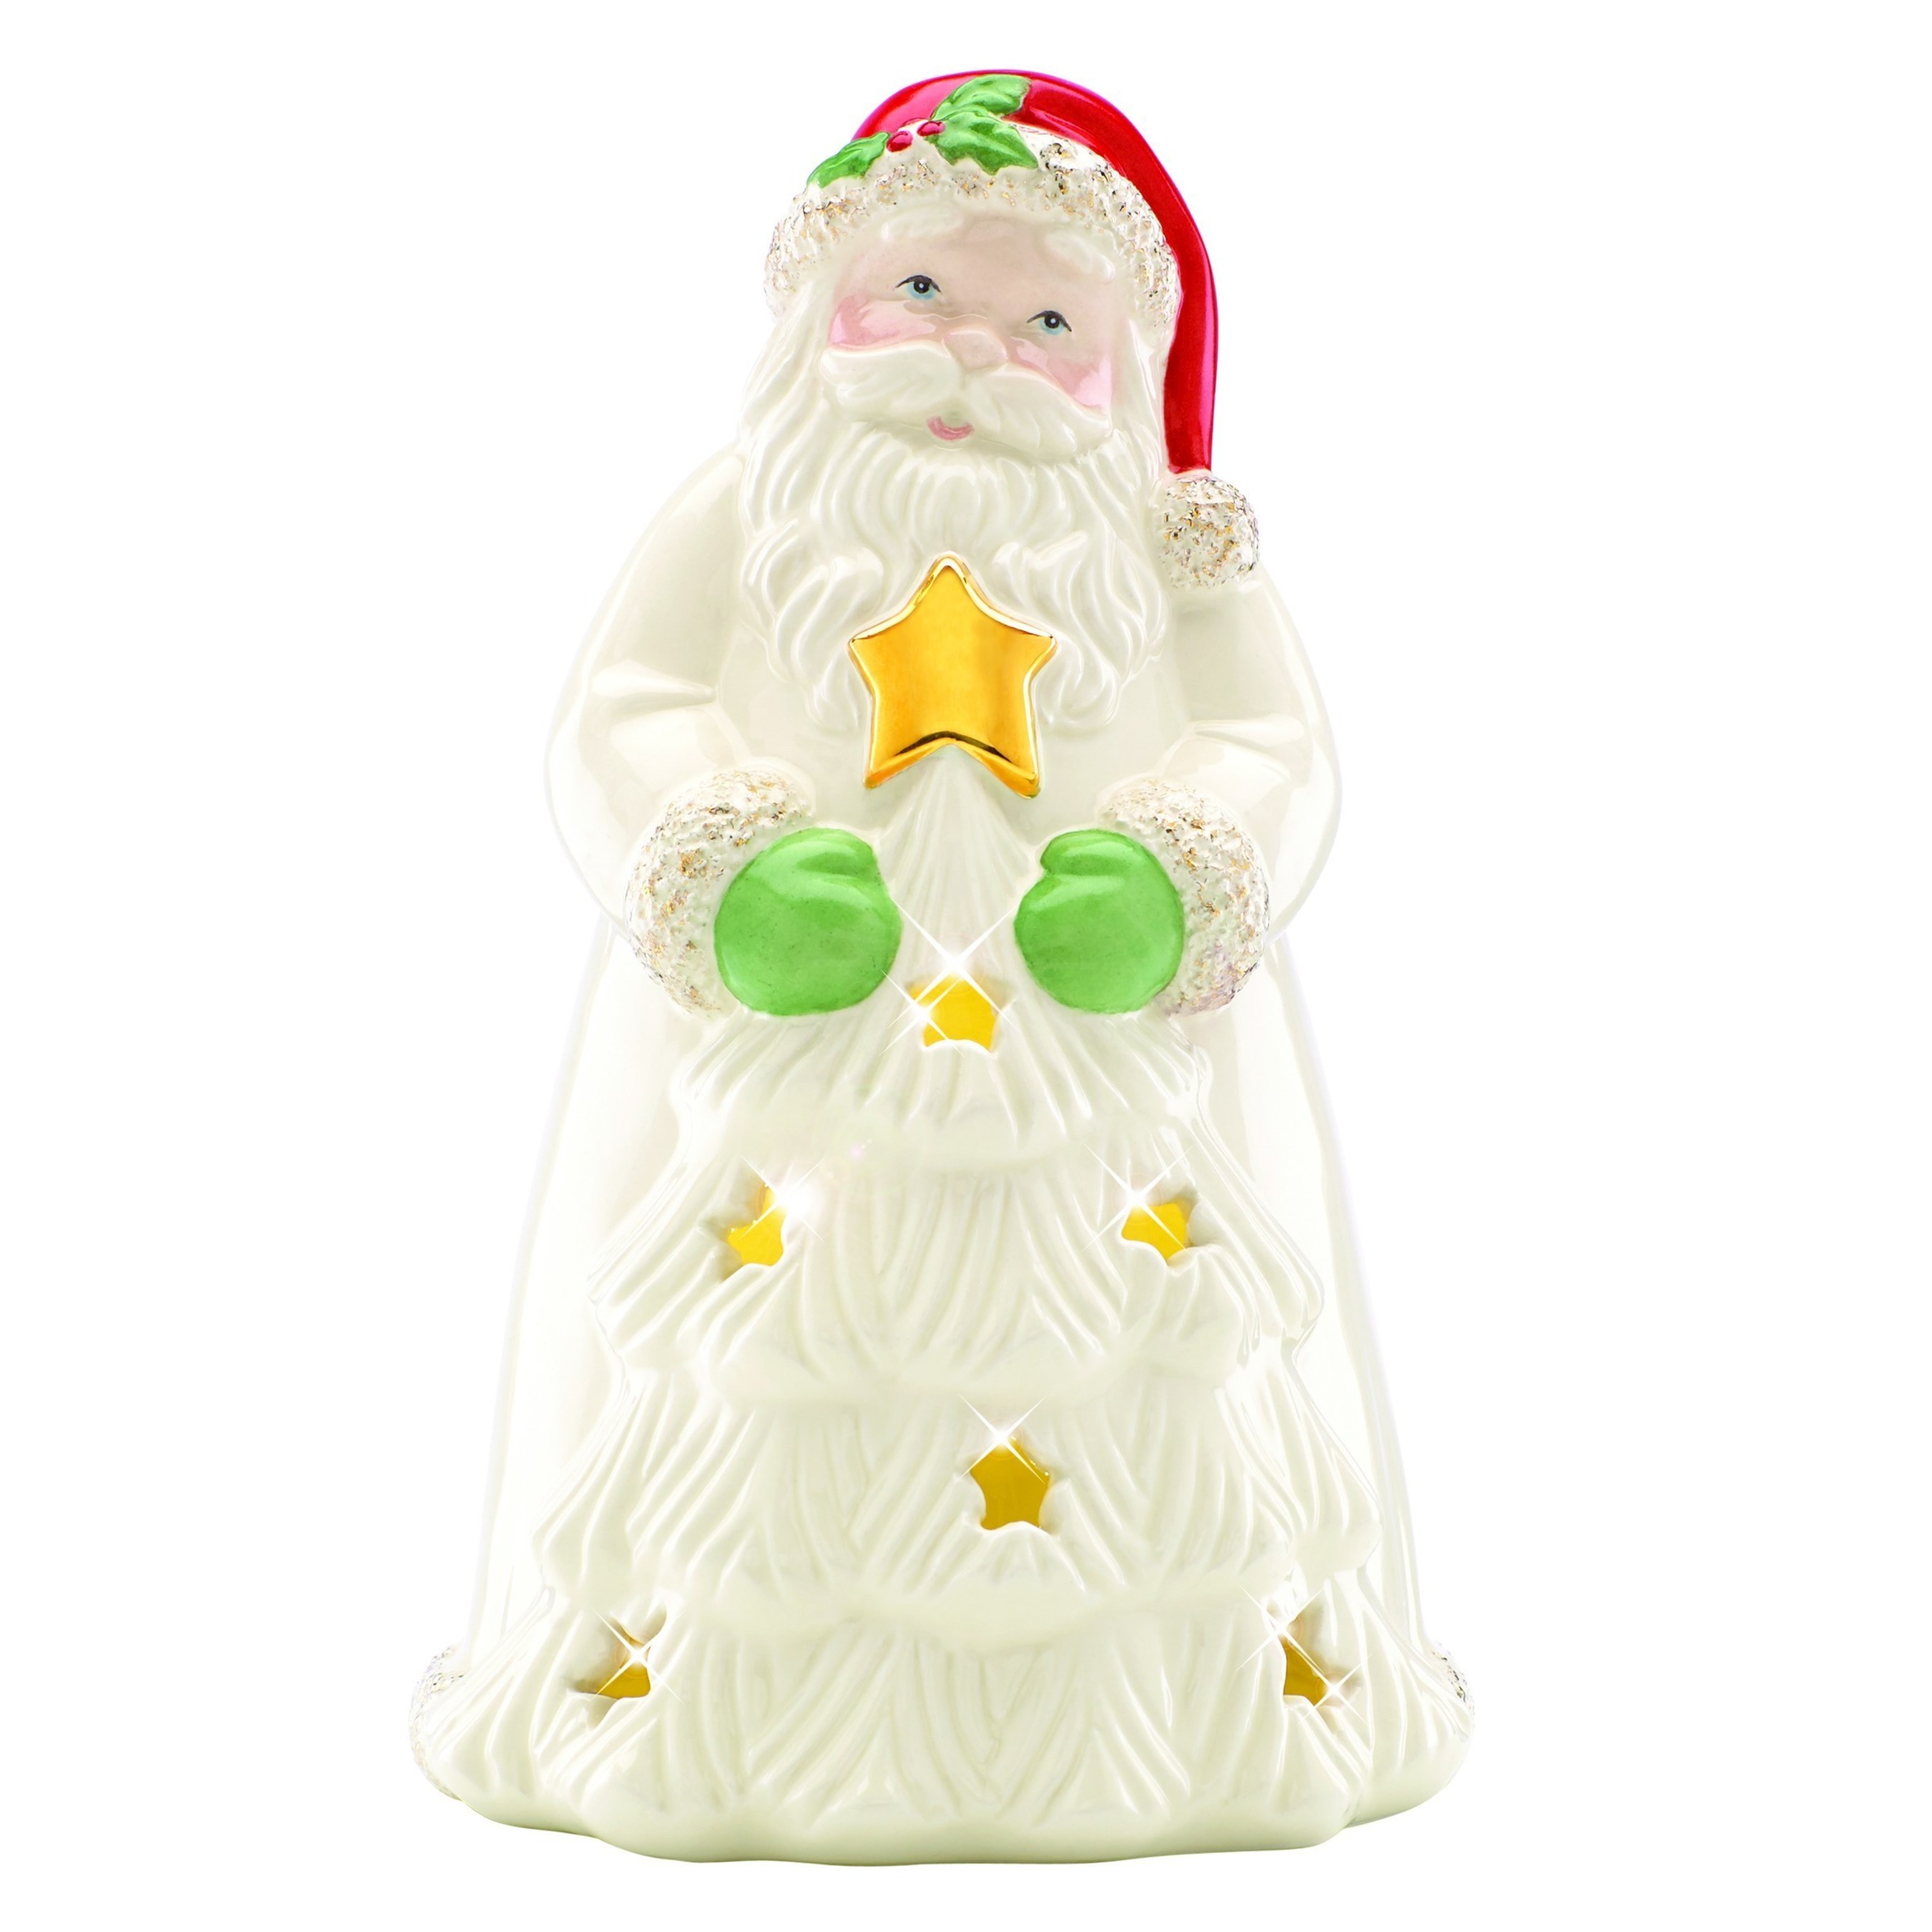 Lenox Santa Lit Figurine - Two lighting effects!  Warm, glowing lights in white or in changing colors make this happy, smiling Santa very special.